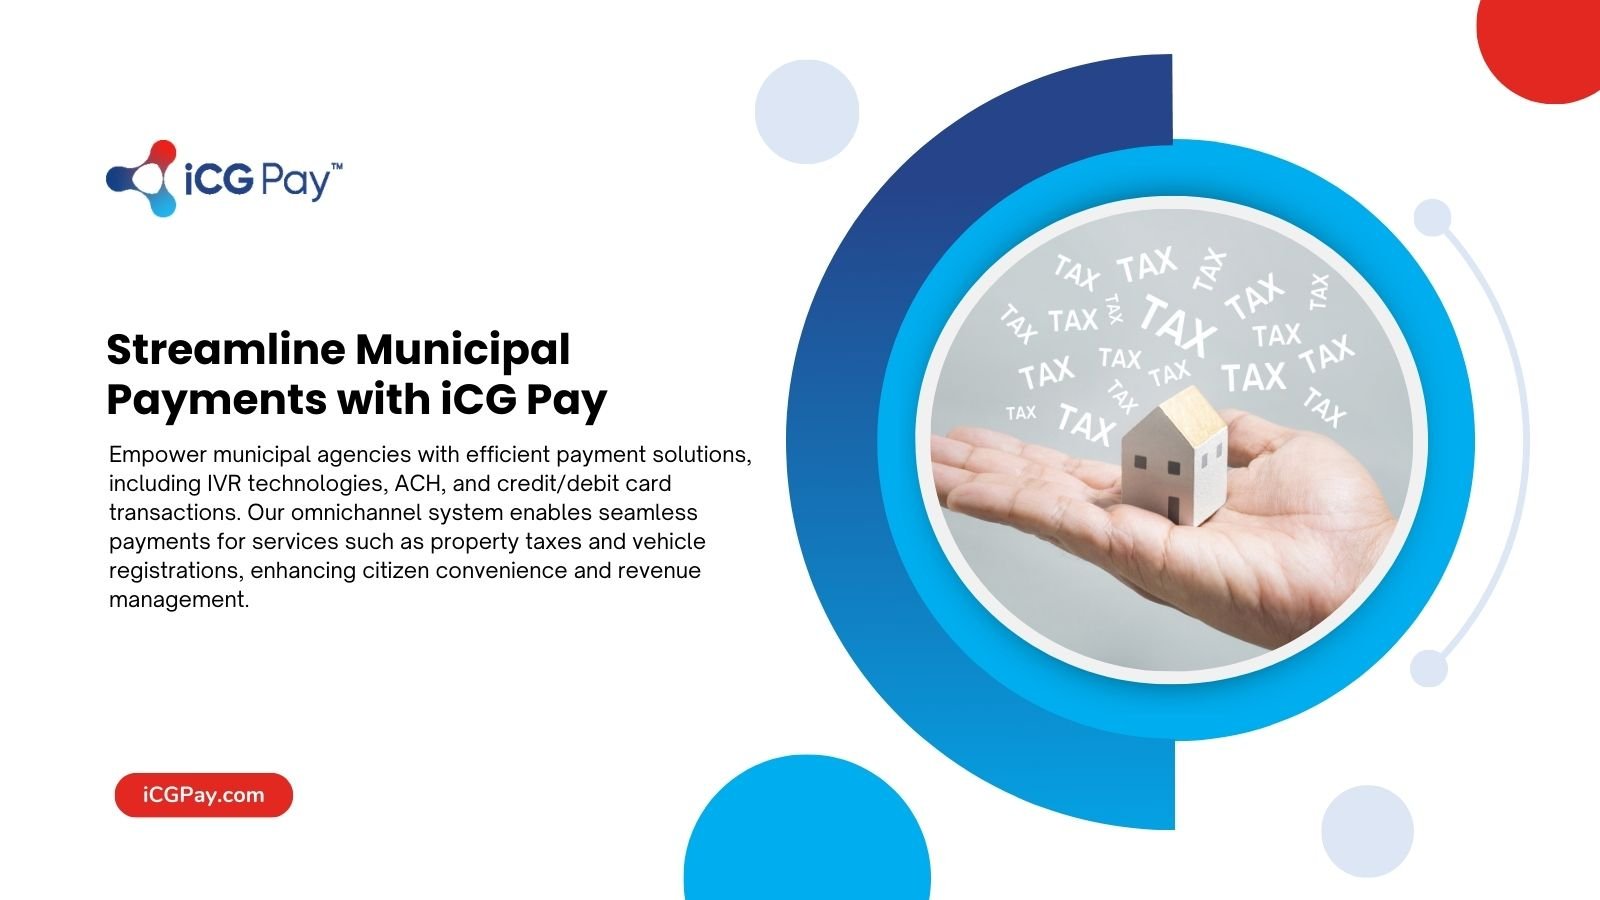 Streamline municipal payments with iCG Pay